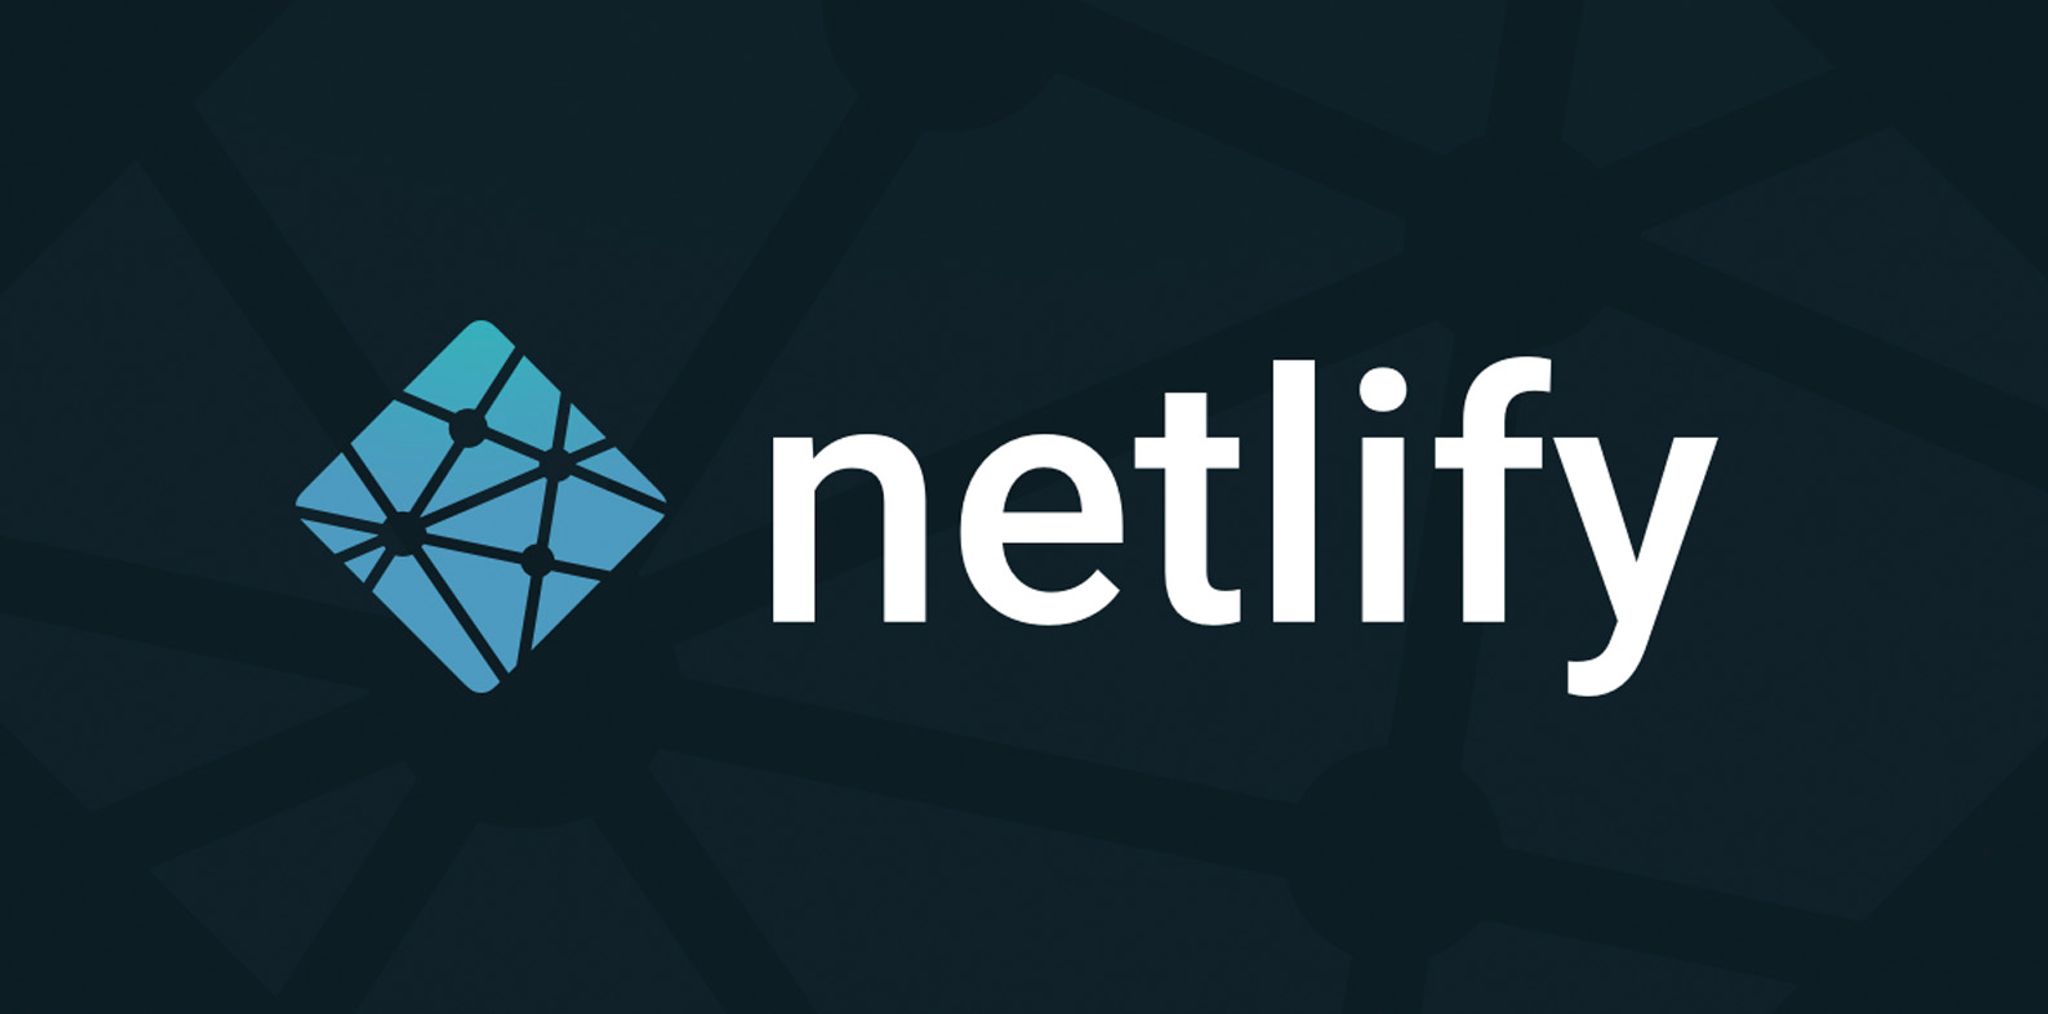 Image of the Netlify logo with the icon and text against a dark blue background.